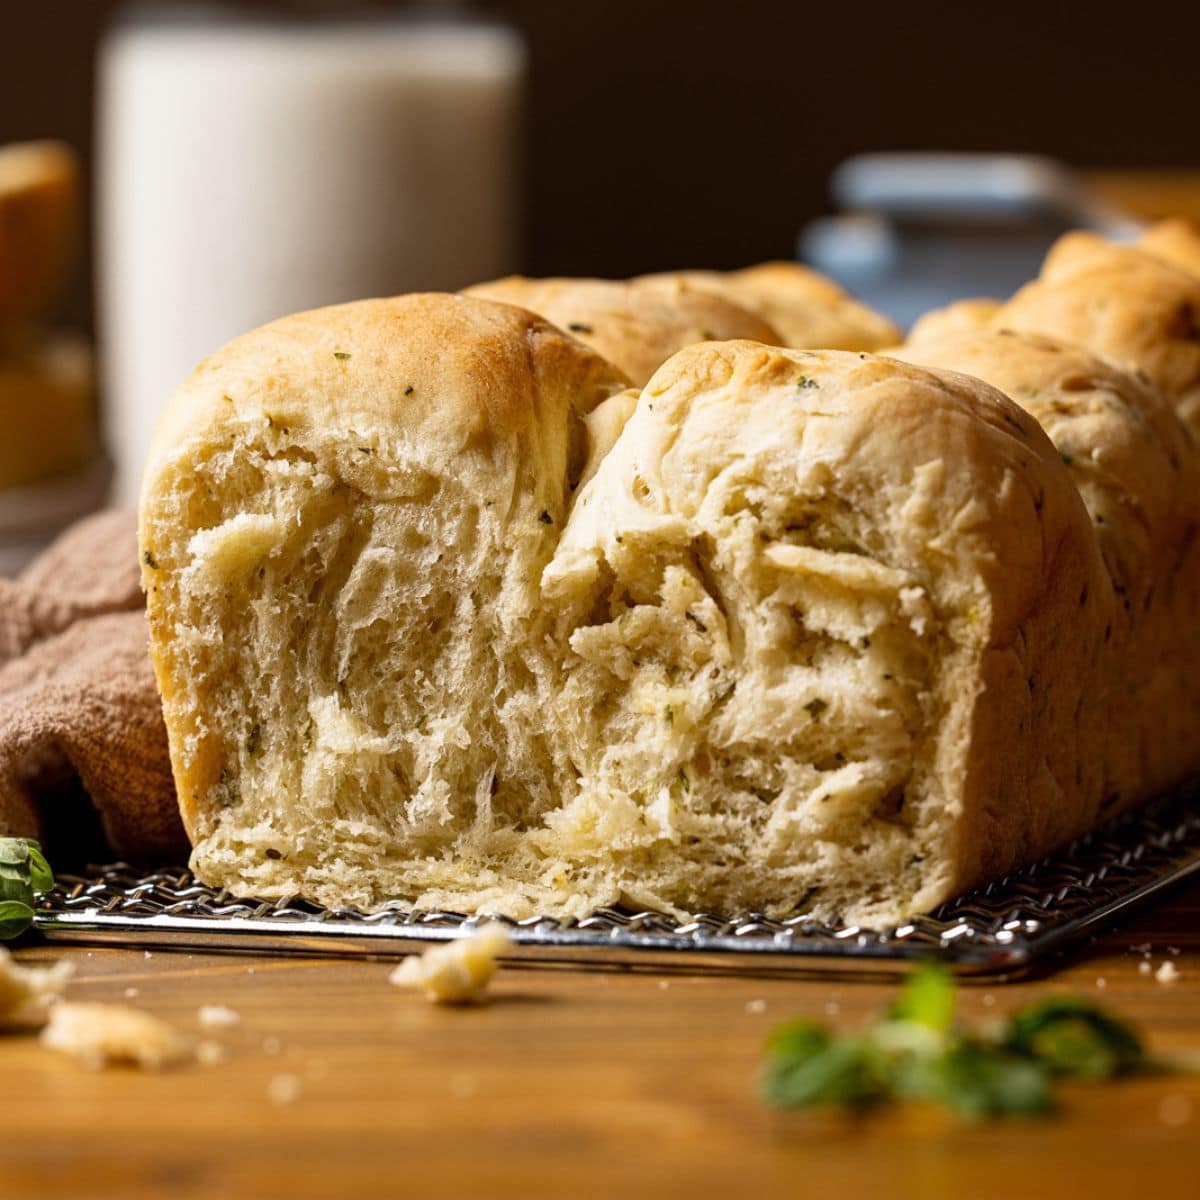 Up close shot of baked bread with a slice removed on a brown table with a cup of milk in the background.